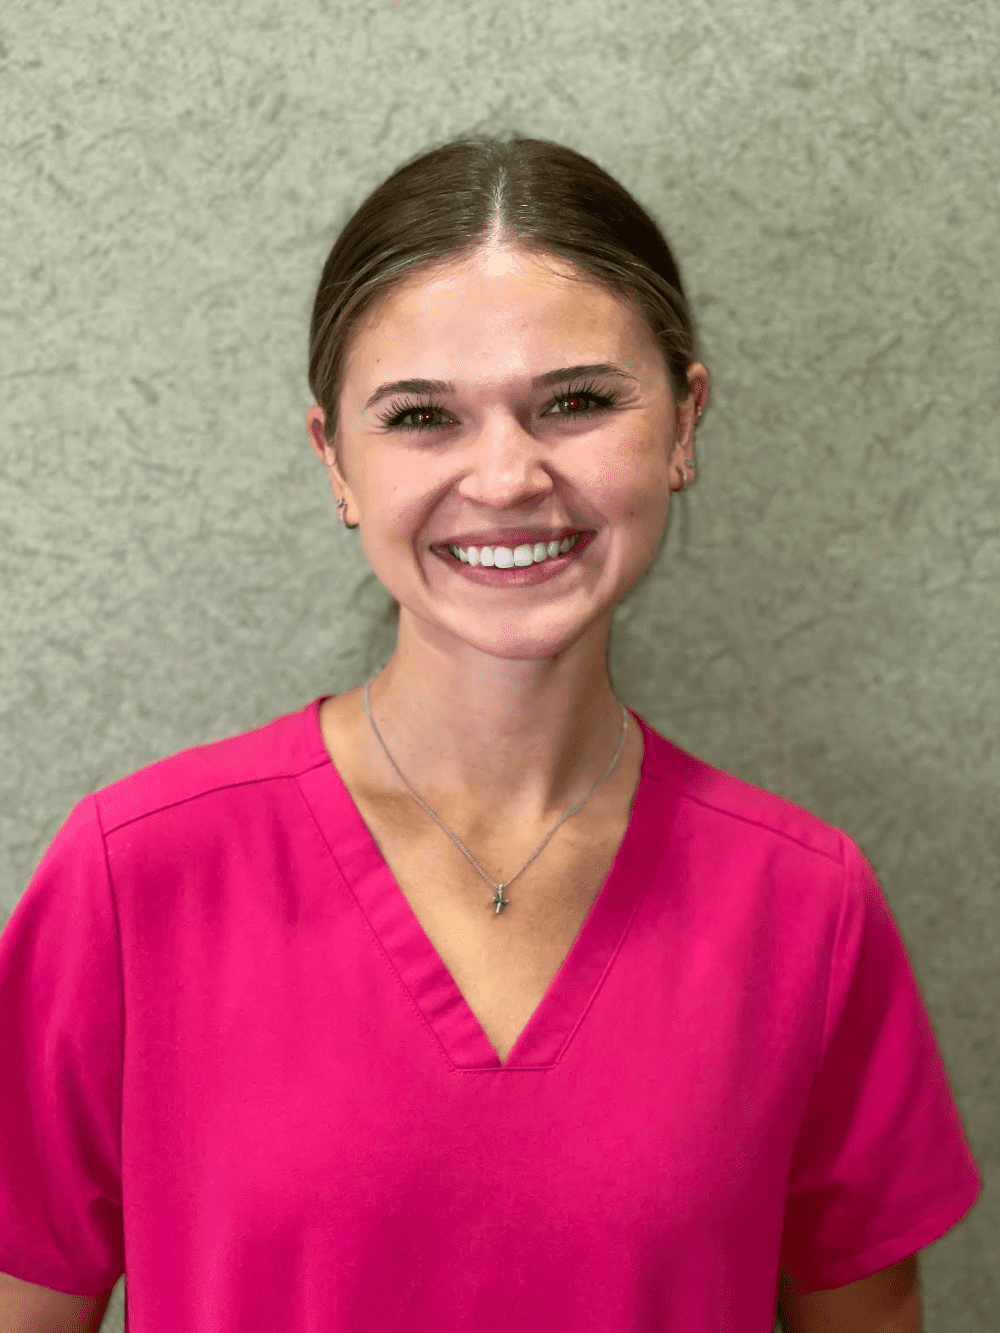 Chelsea Hawes, CCC-SLP, Speech-Language Pathologist at Jarvis Pediatric Therapy